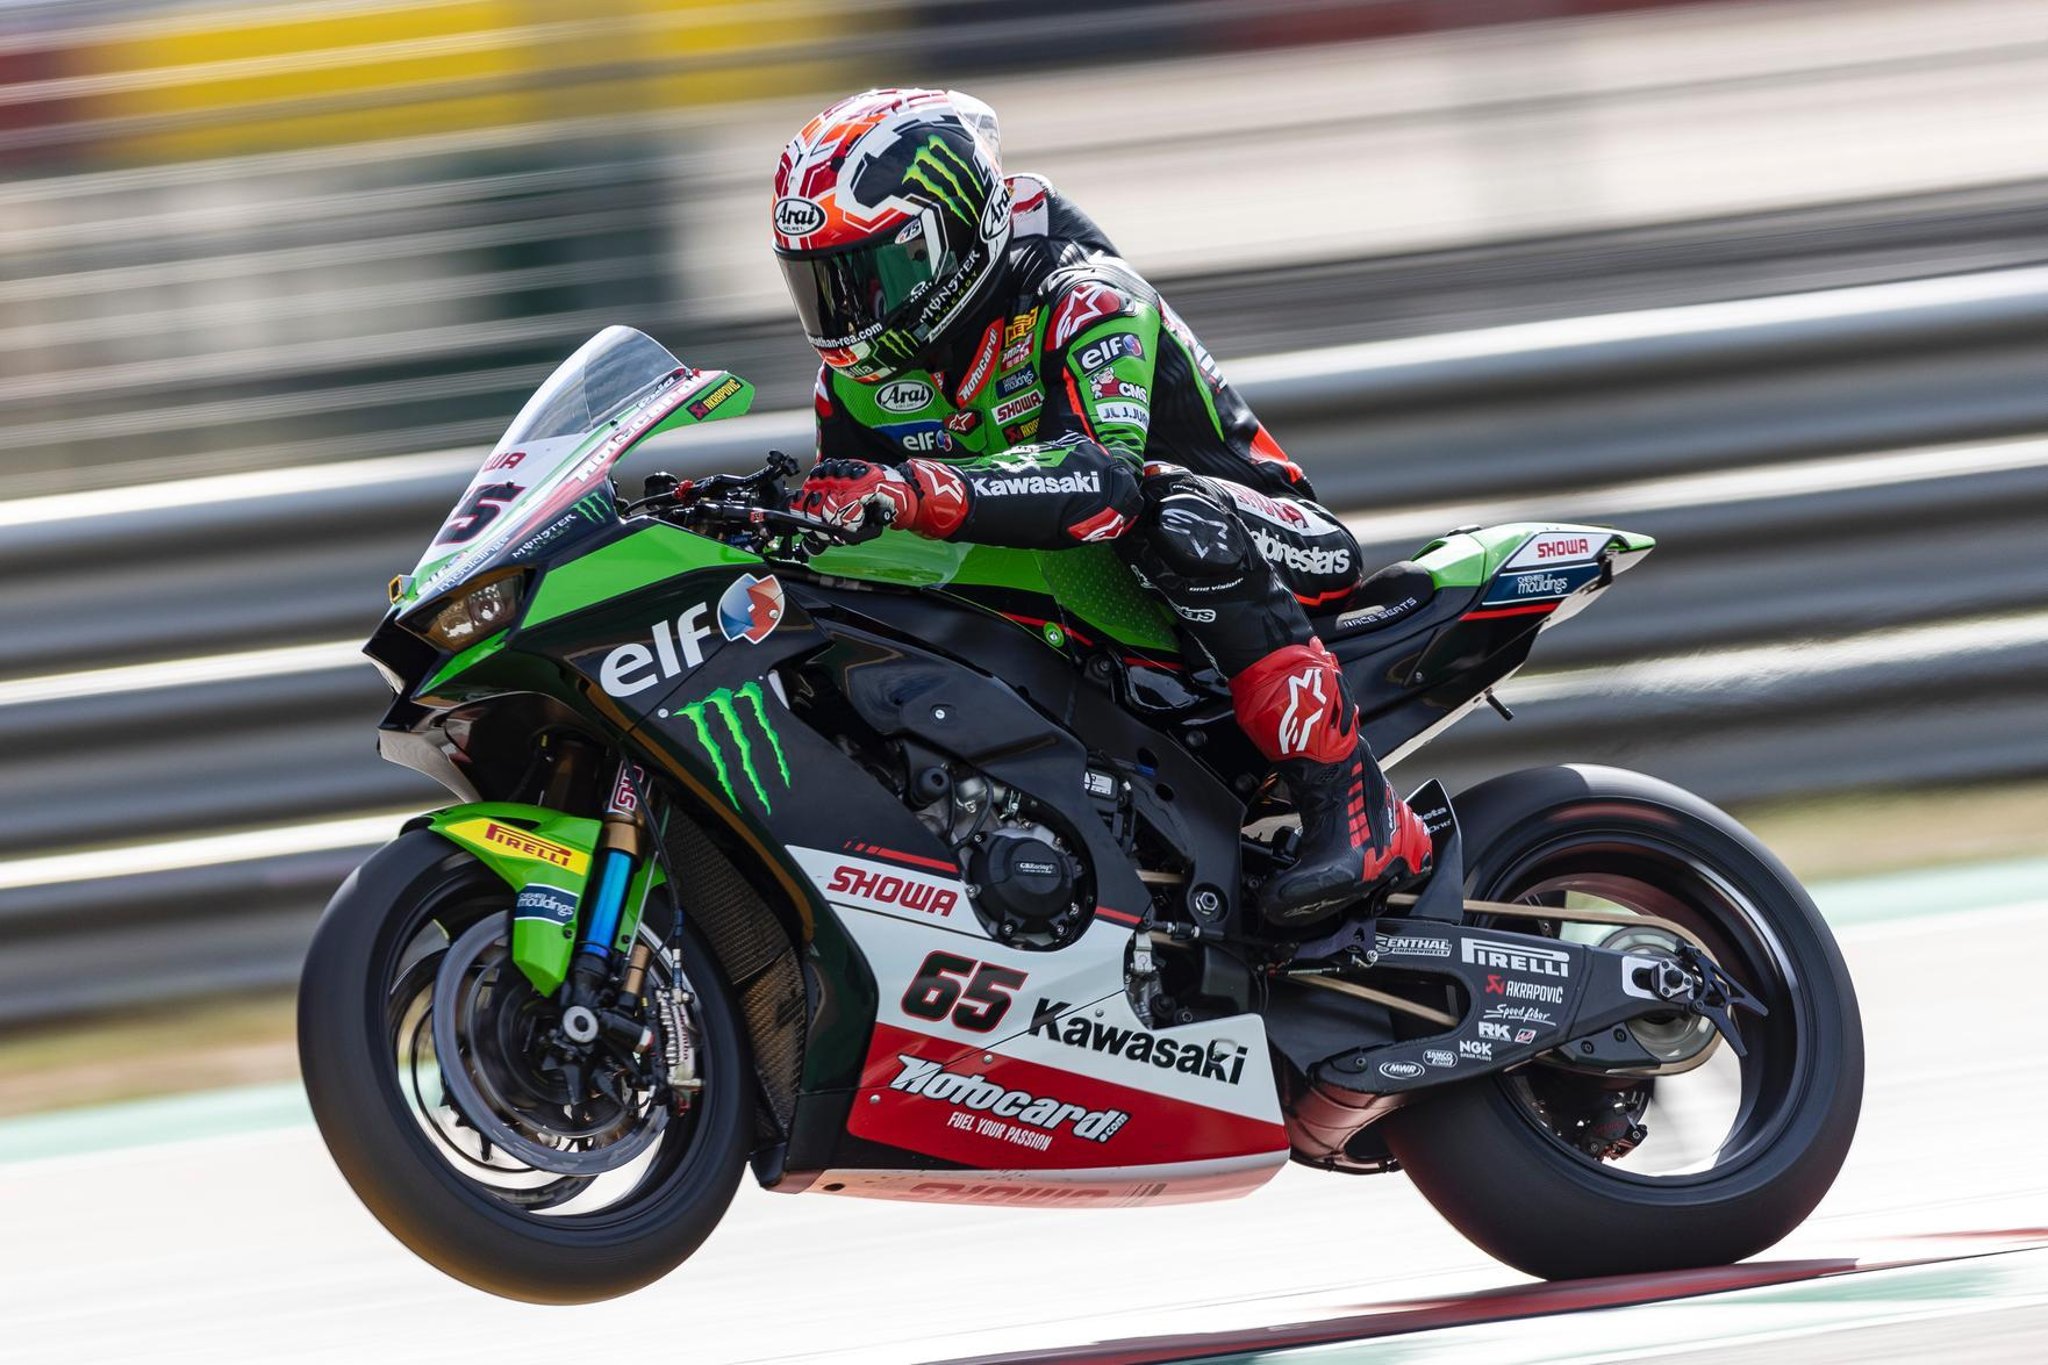 Jonathan Rea victorious as World Superbike Championship blasts off at Motorland Aragon in Spain